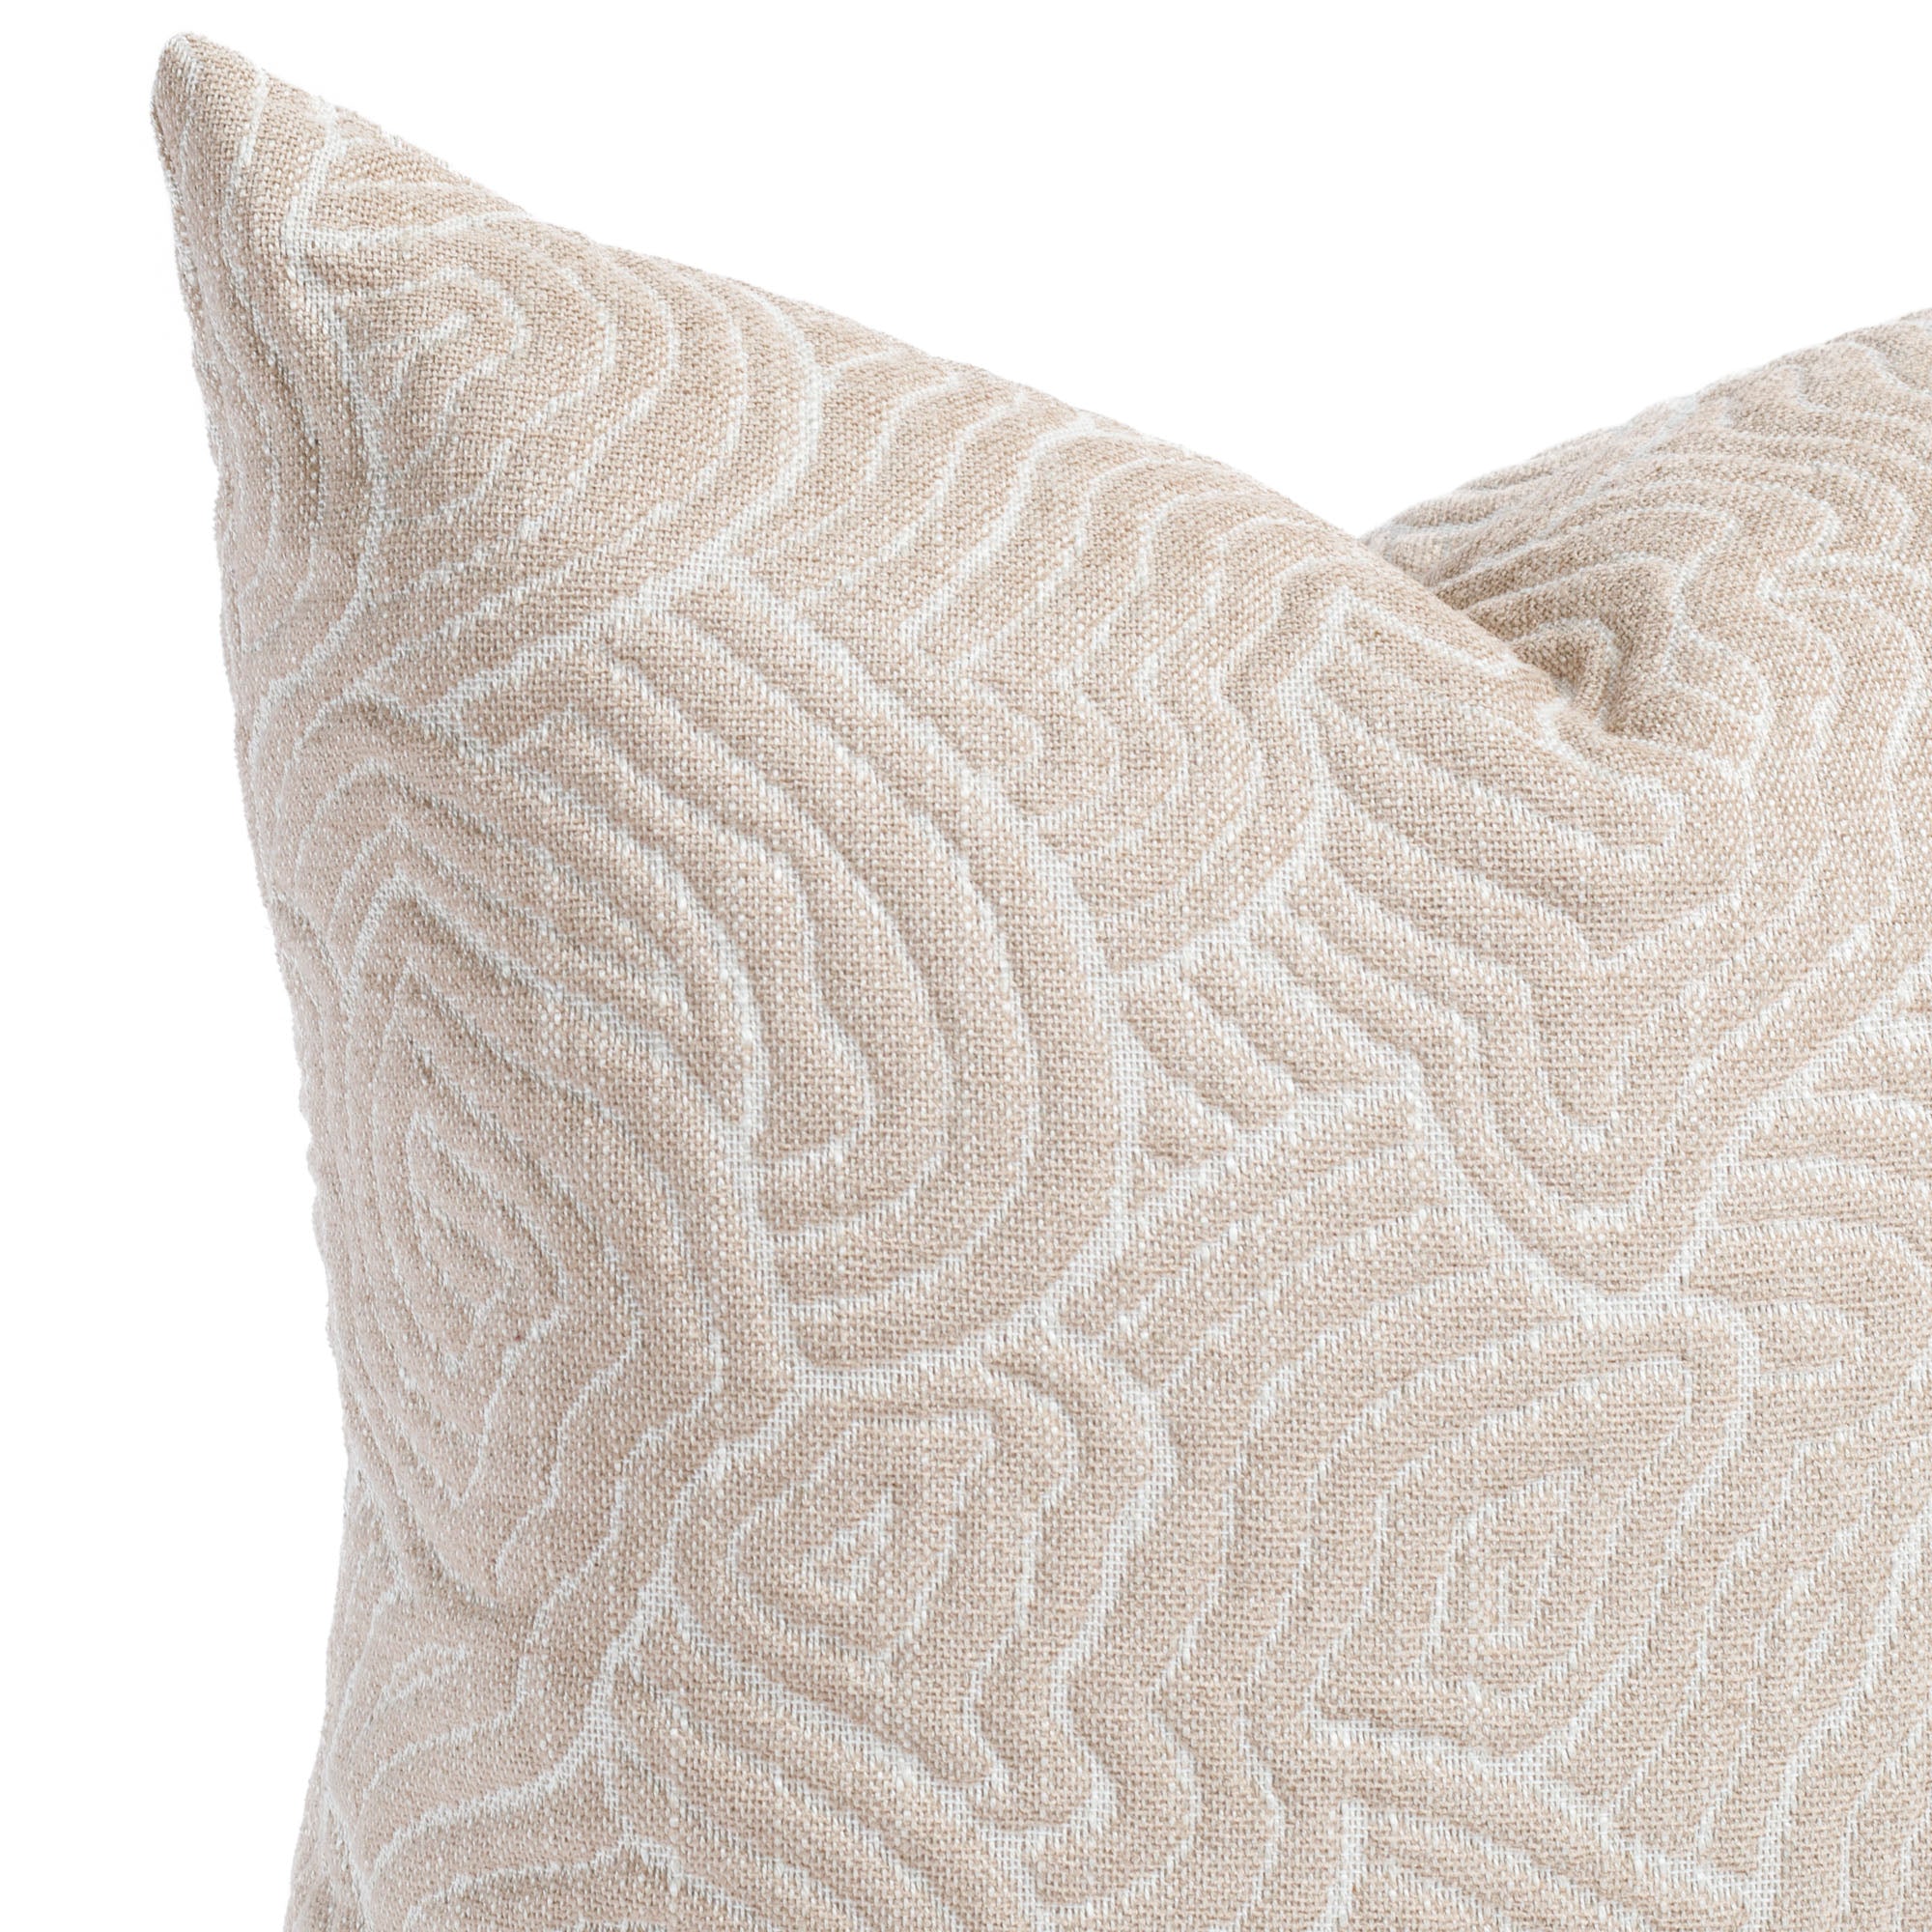  a quilted abstract rose patterned pink throw blush pillow: close up view